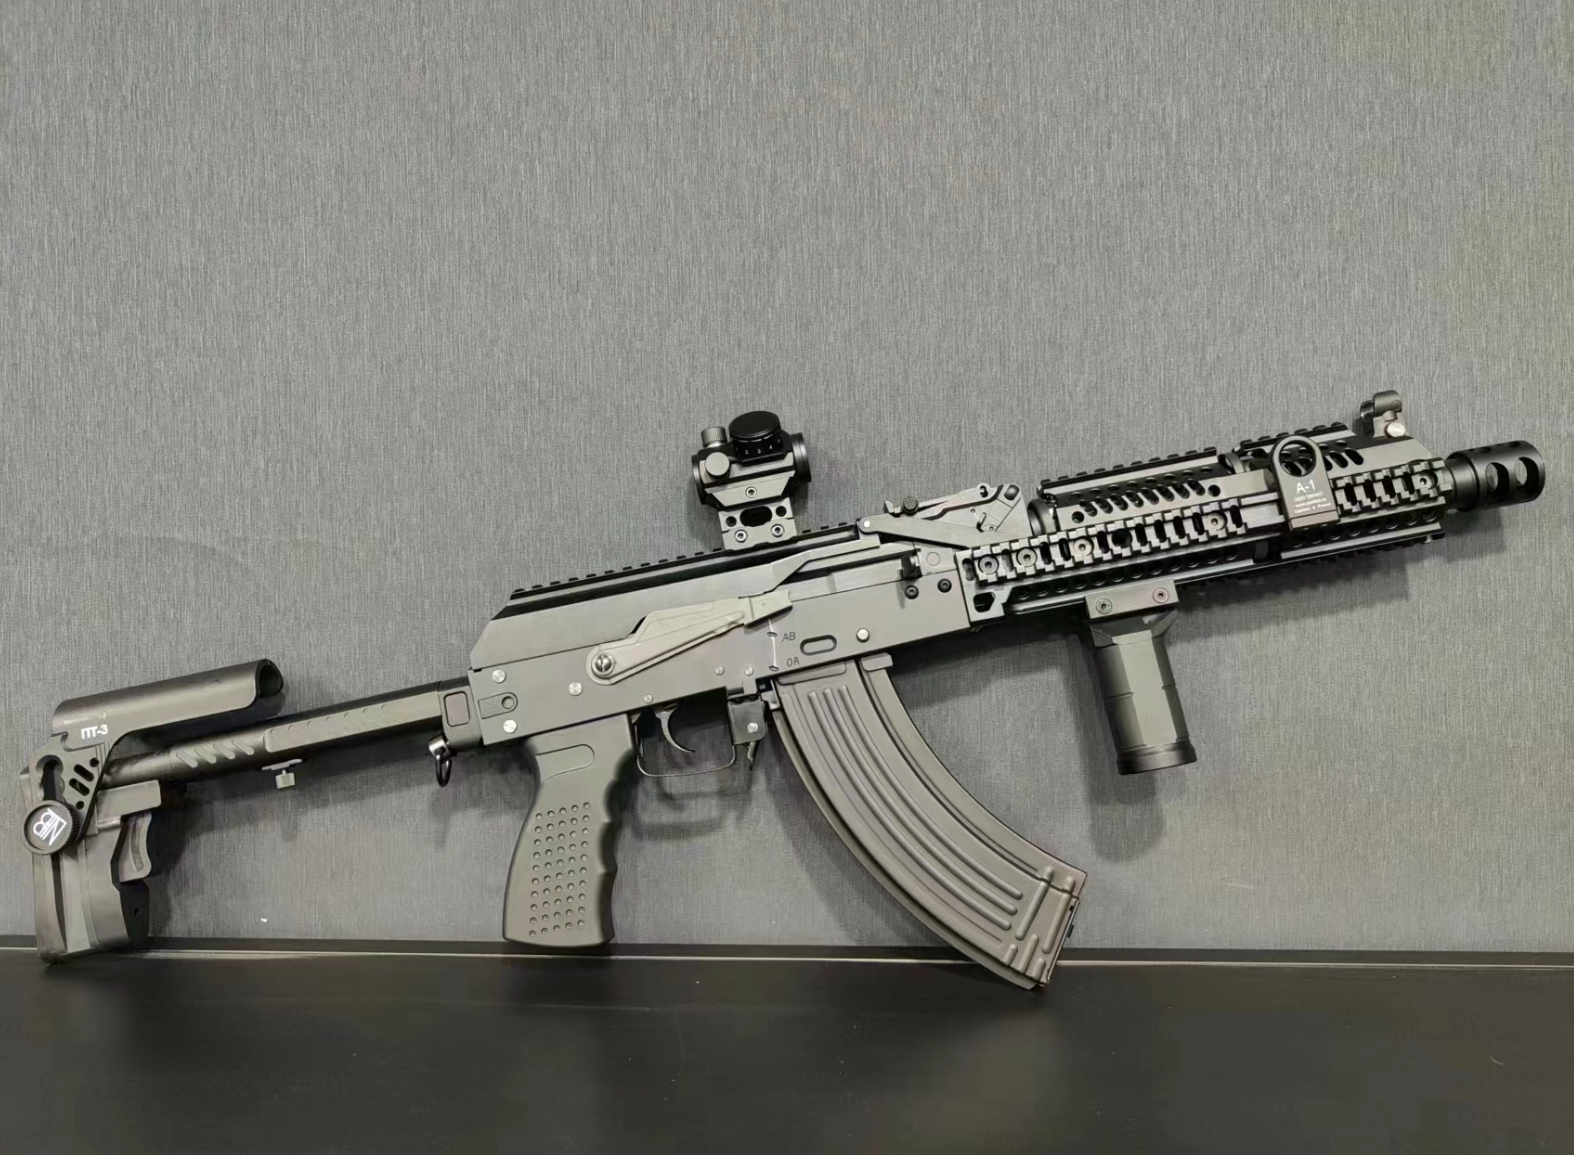 A highly detailed model of a BlasterMaster PP19 Vityaz submachine blaster with scope, mounted on a grey background.